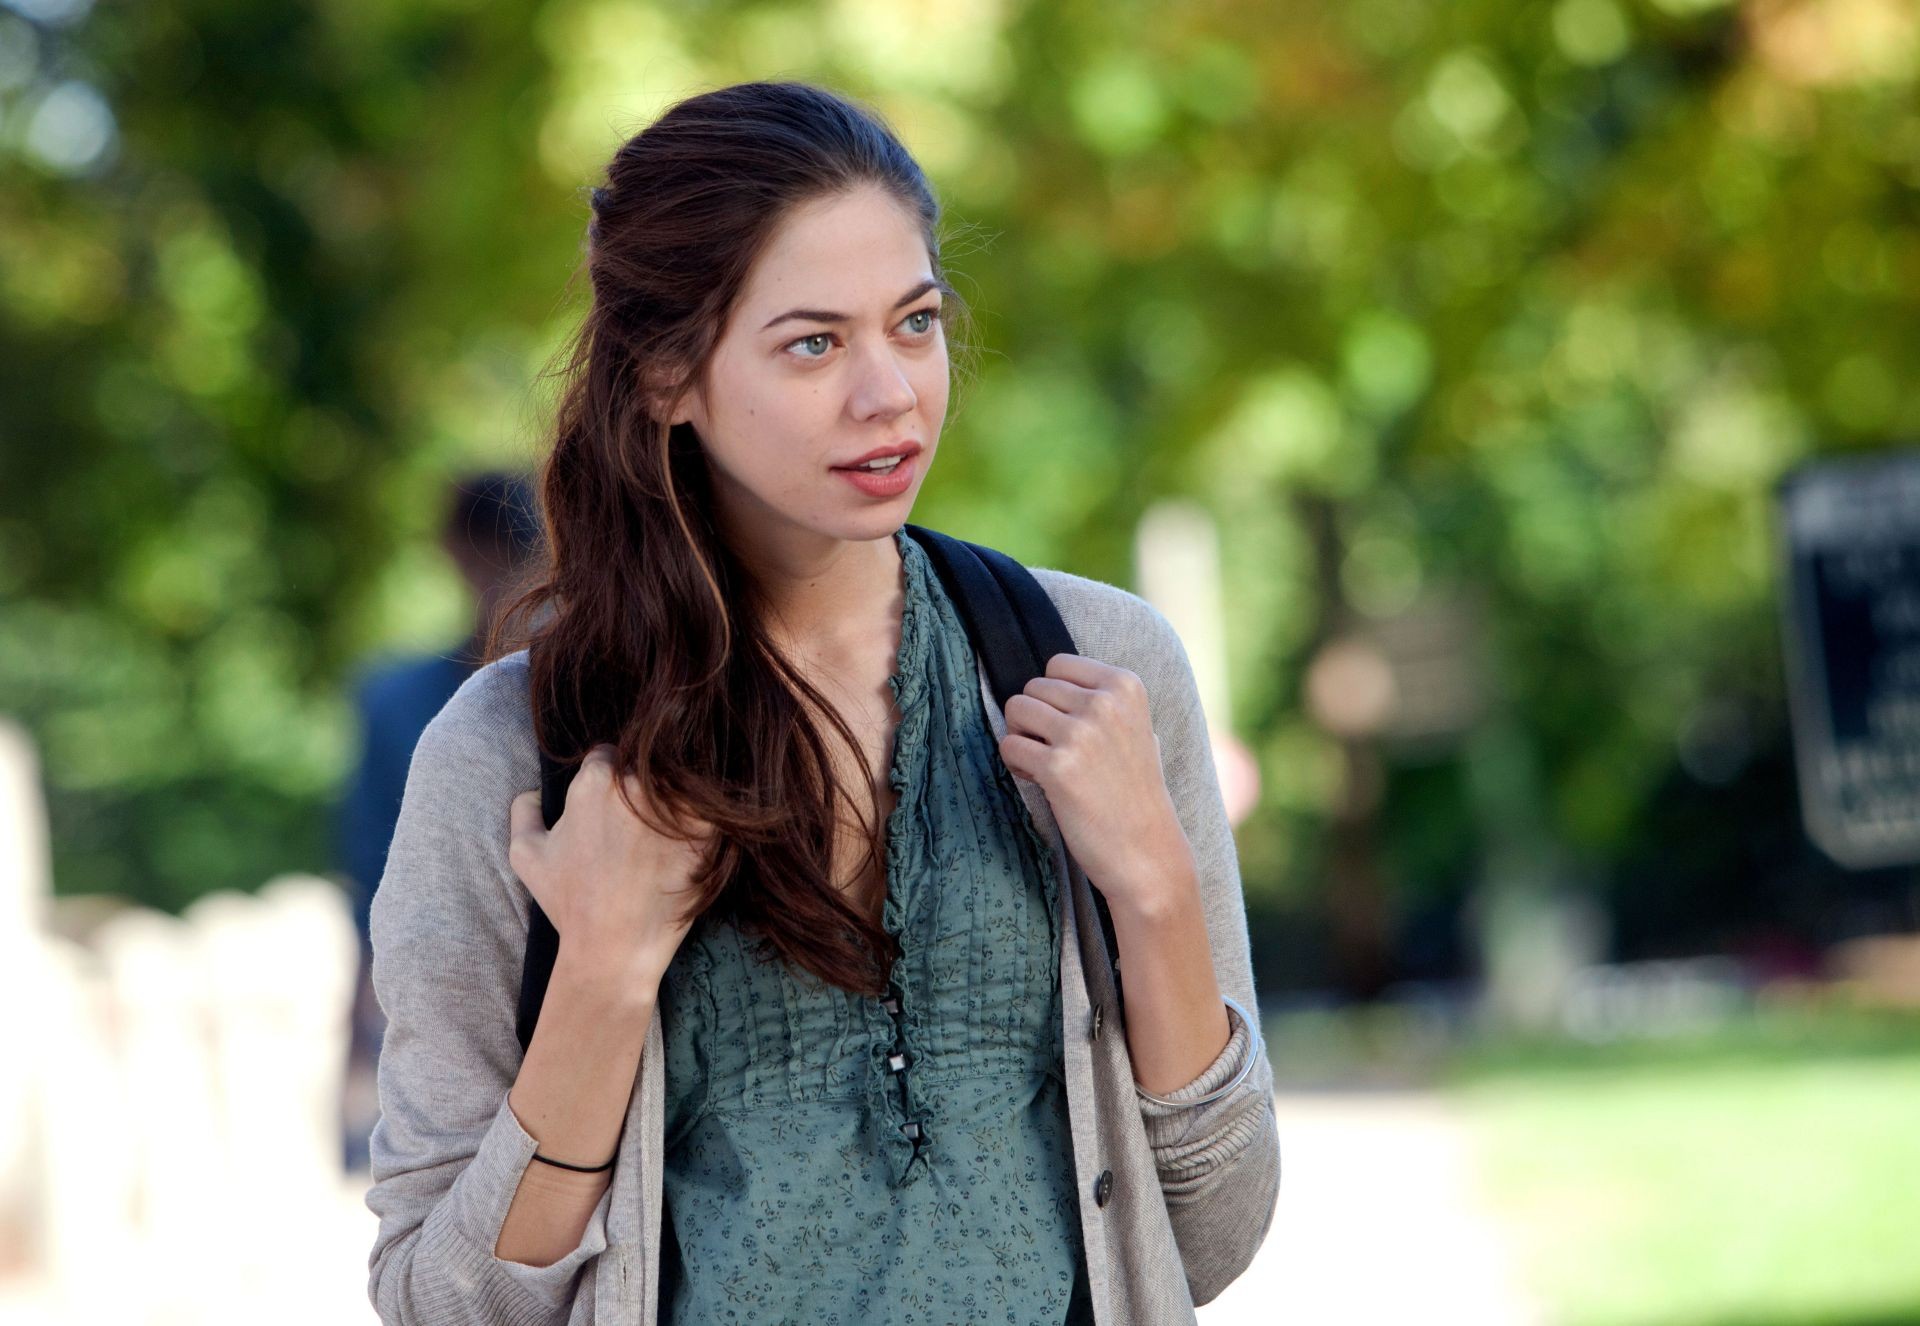 Analeigh Tipton stars as Lily in Sony Pictures Classics' Damsels in Distress (2012). Photo credit by Kerry Brown.